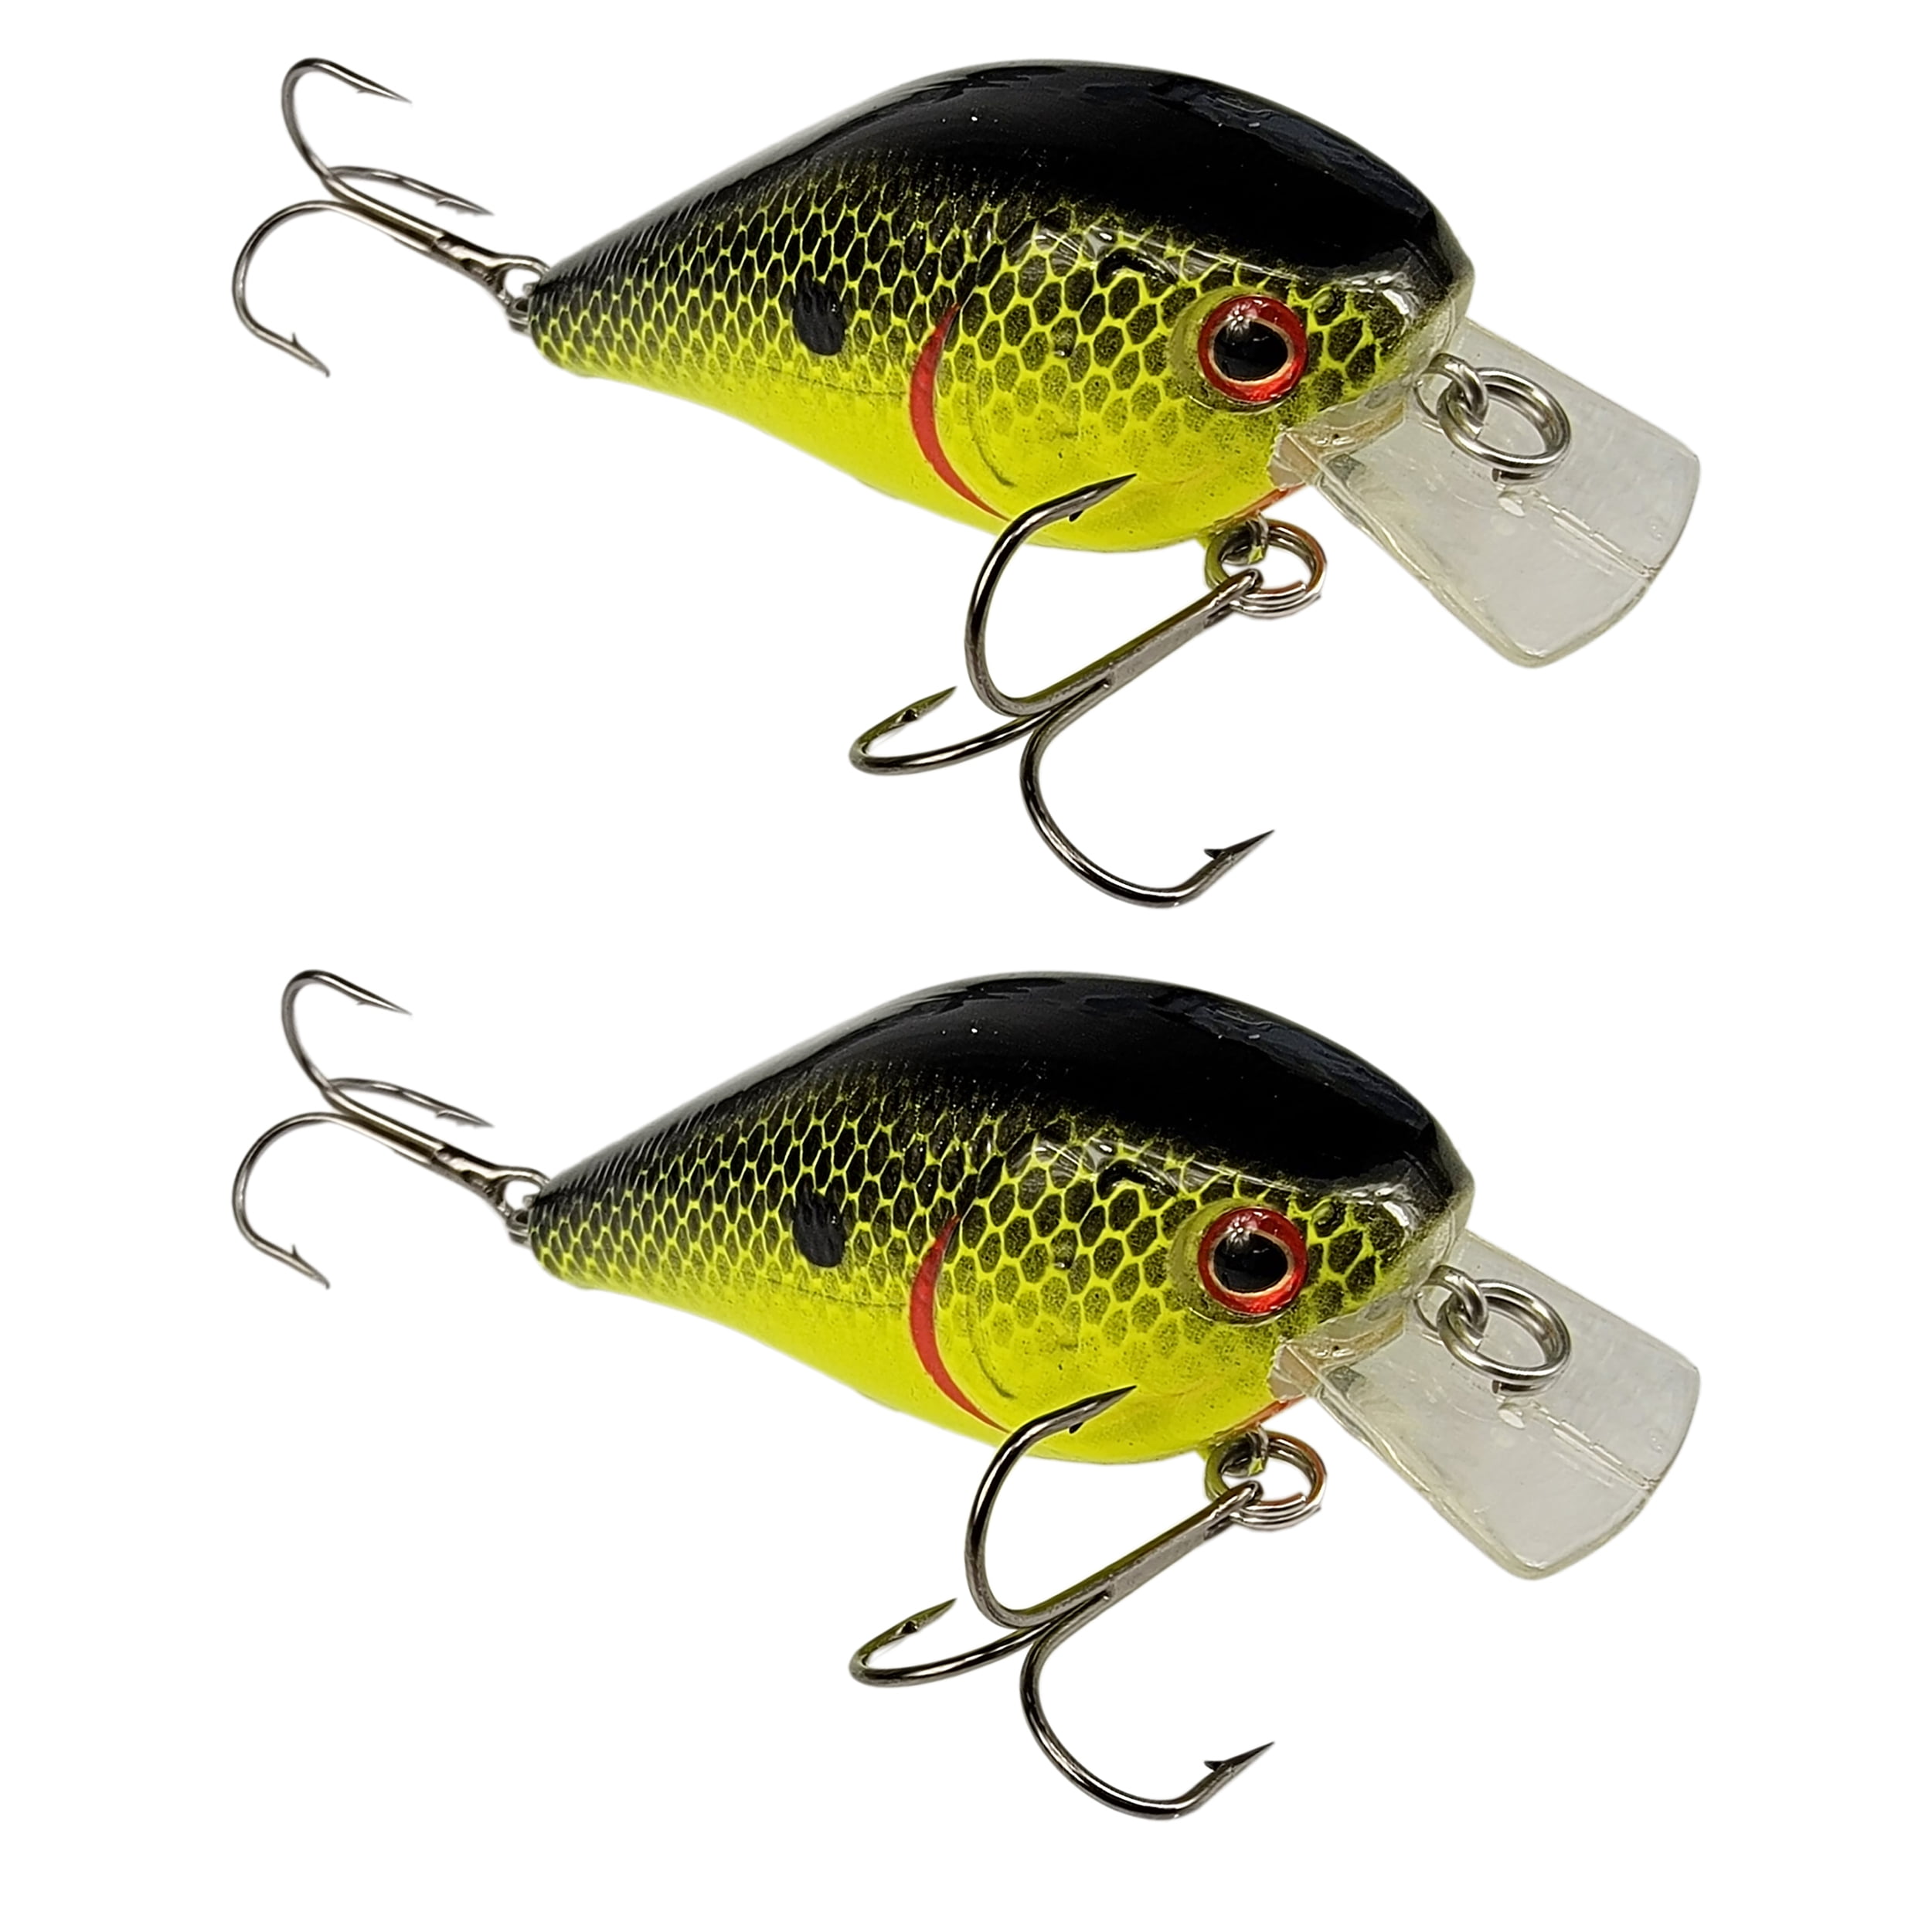 Tackle HD 2-Pack Square Bill Crankbait, 2.75 Lipped Rattle Crankbaits with  Fishing Hooks, Top Water Fishing Lures for Crappie, Walleye, Perch, or Bass  Fishing, Natural Shad 